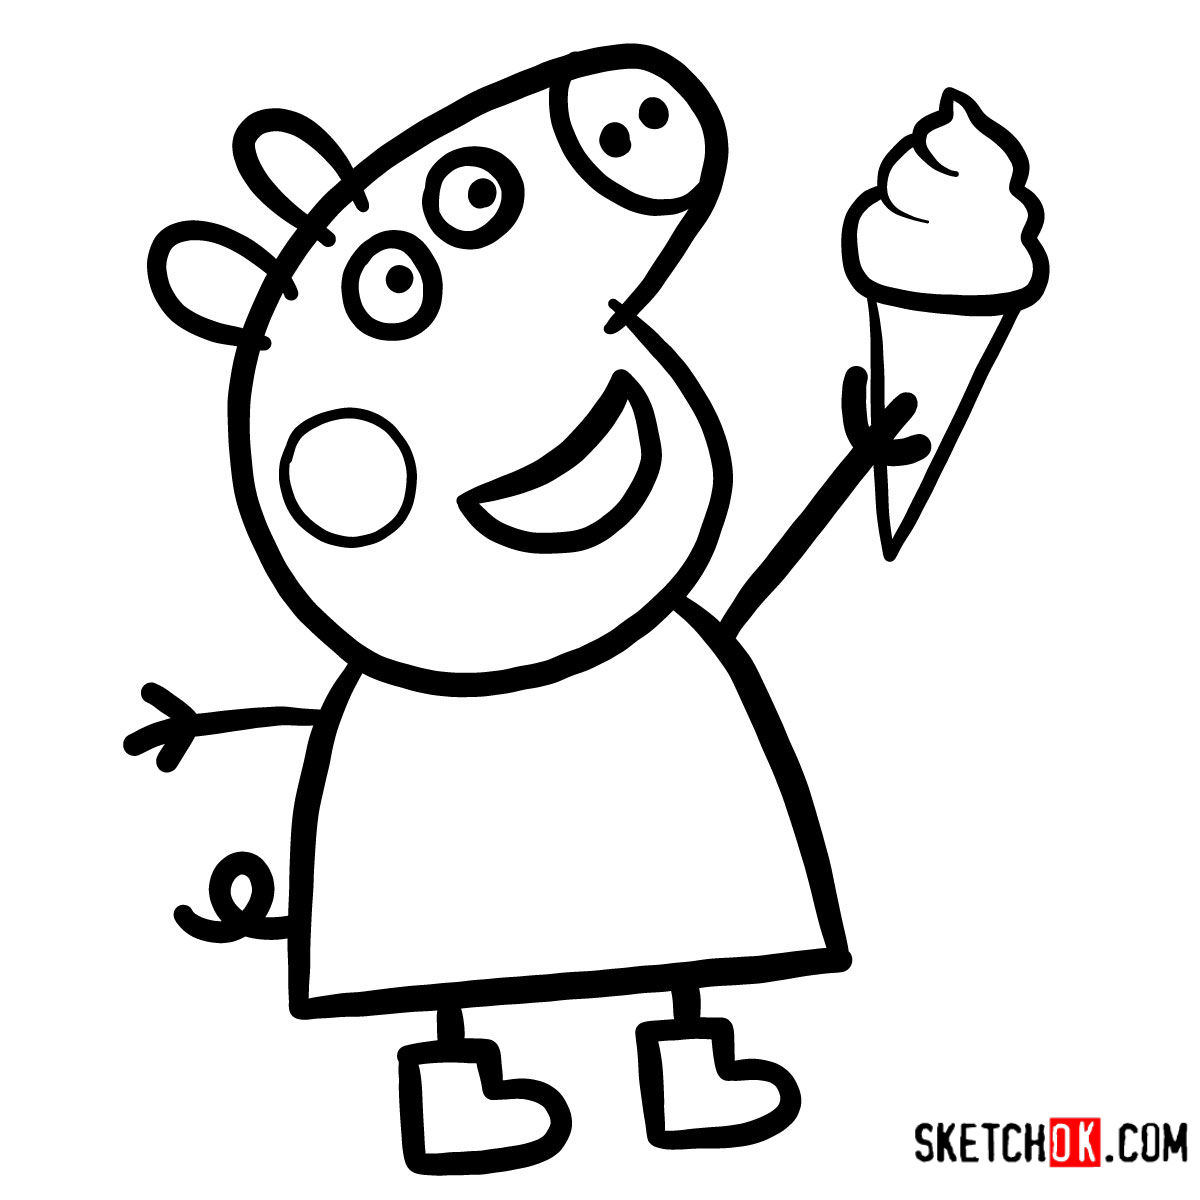 How to draw Peppa Pig with an icecream Sketchok easy